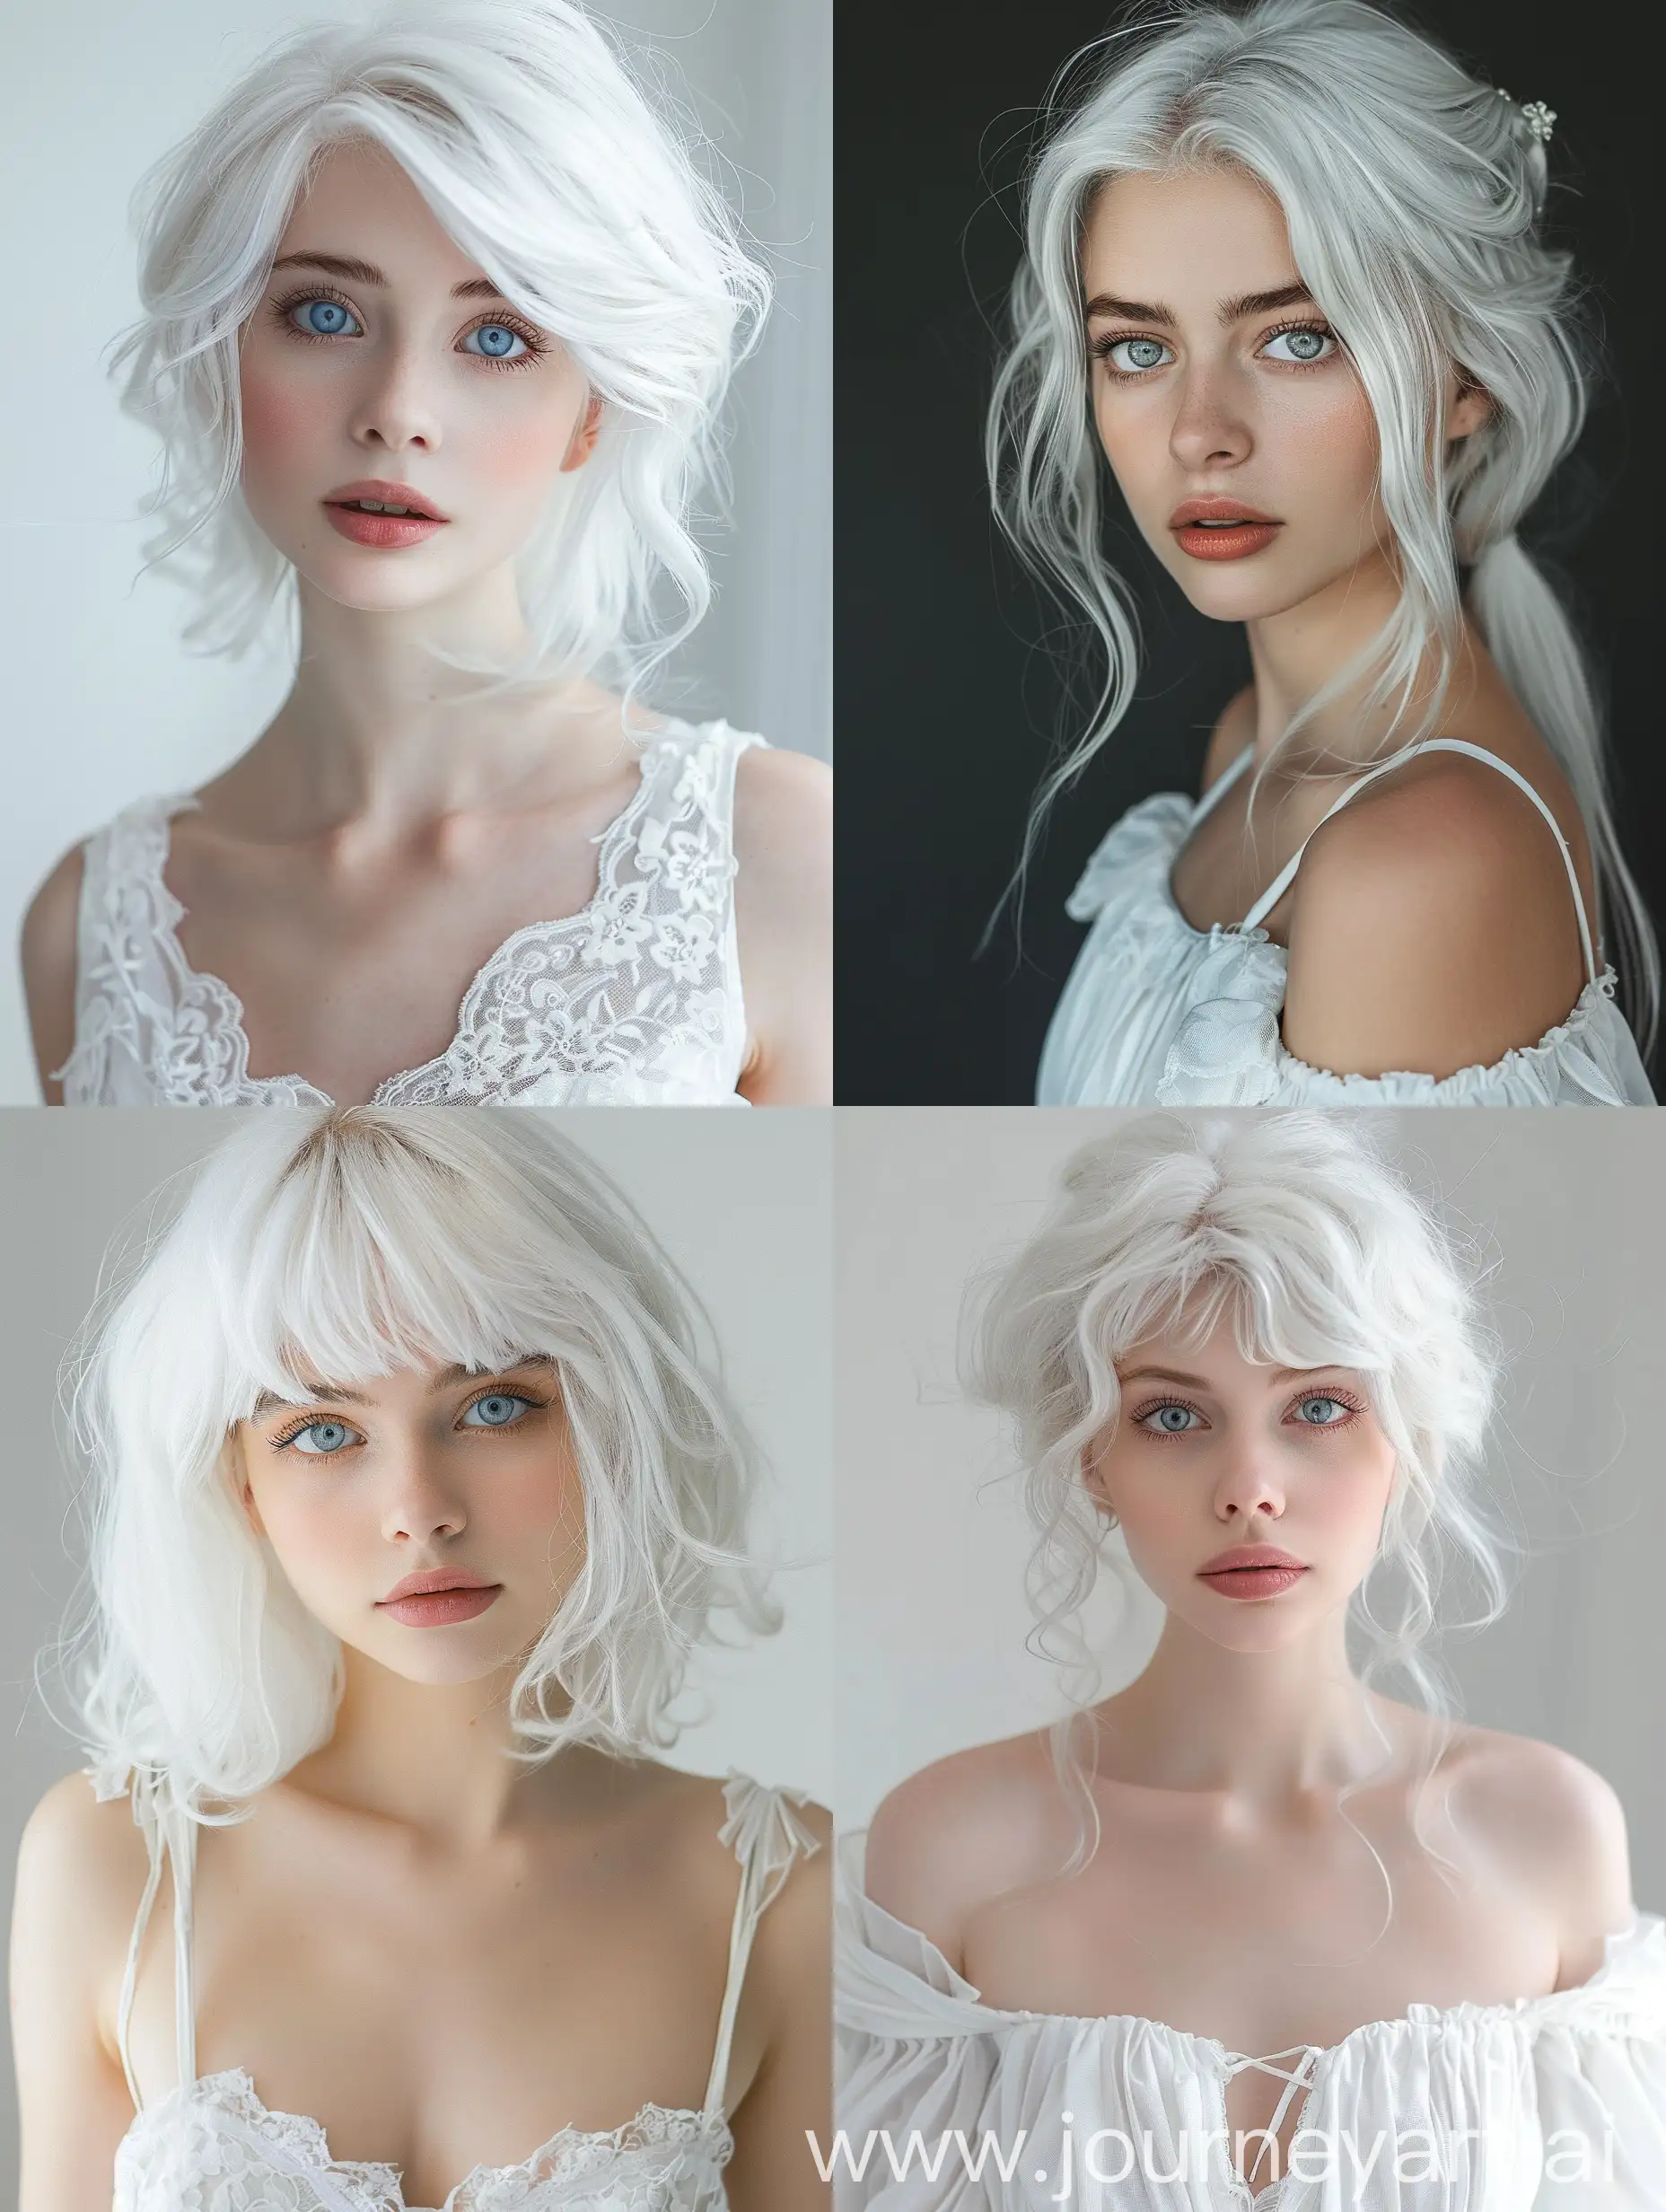 Elegant-WhiteHaired-Woman-in-Graceful-White-Dress-and-Blue-Eyes